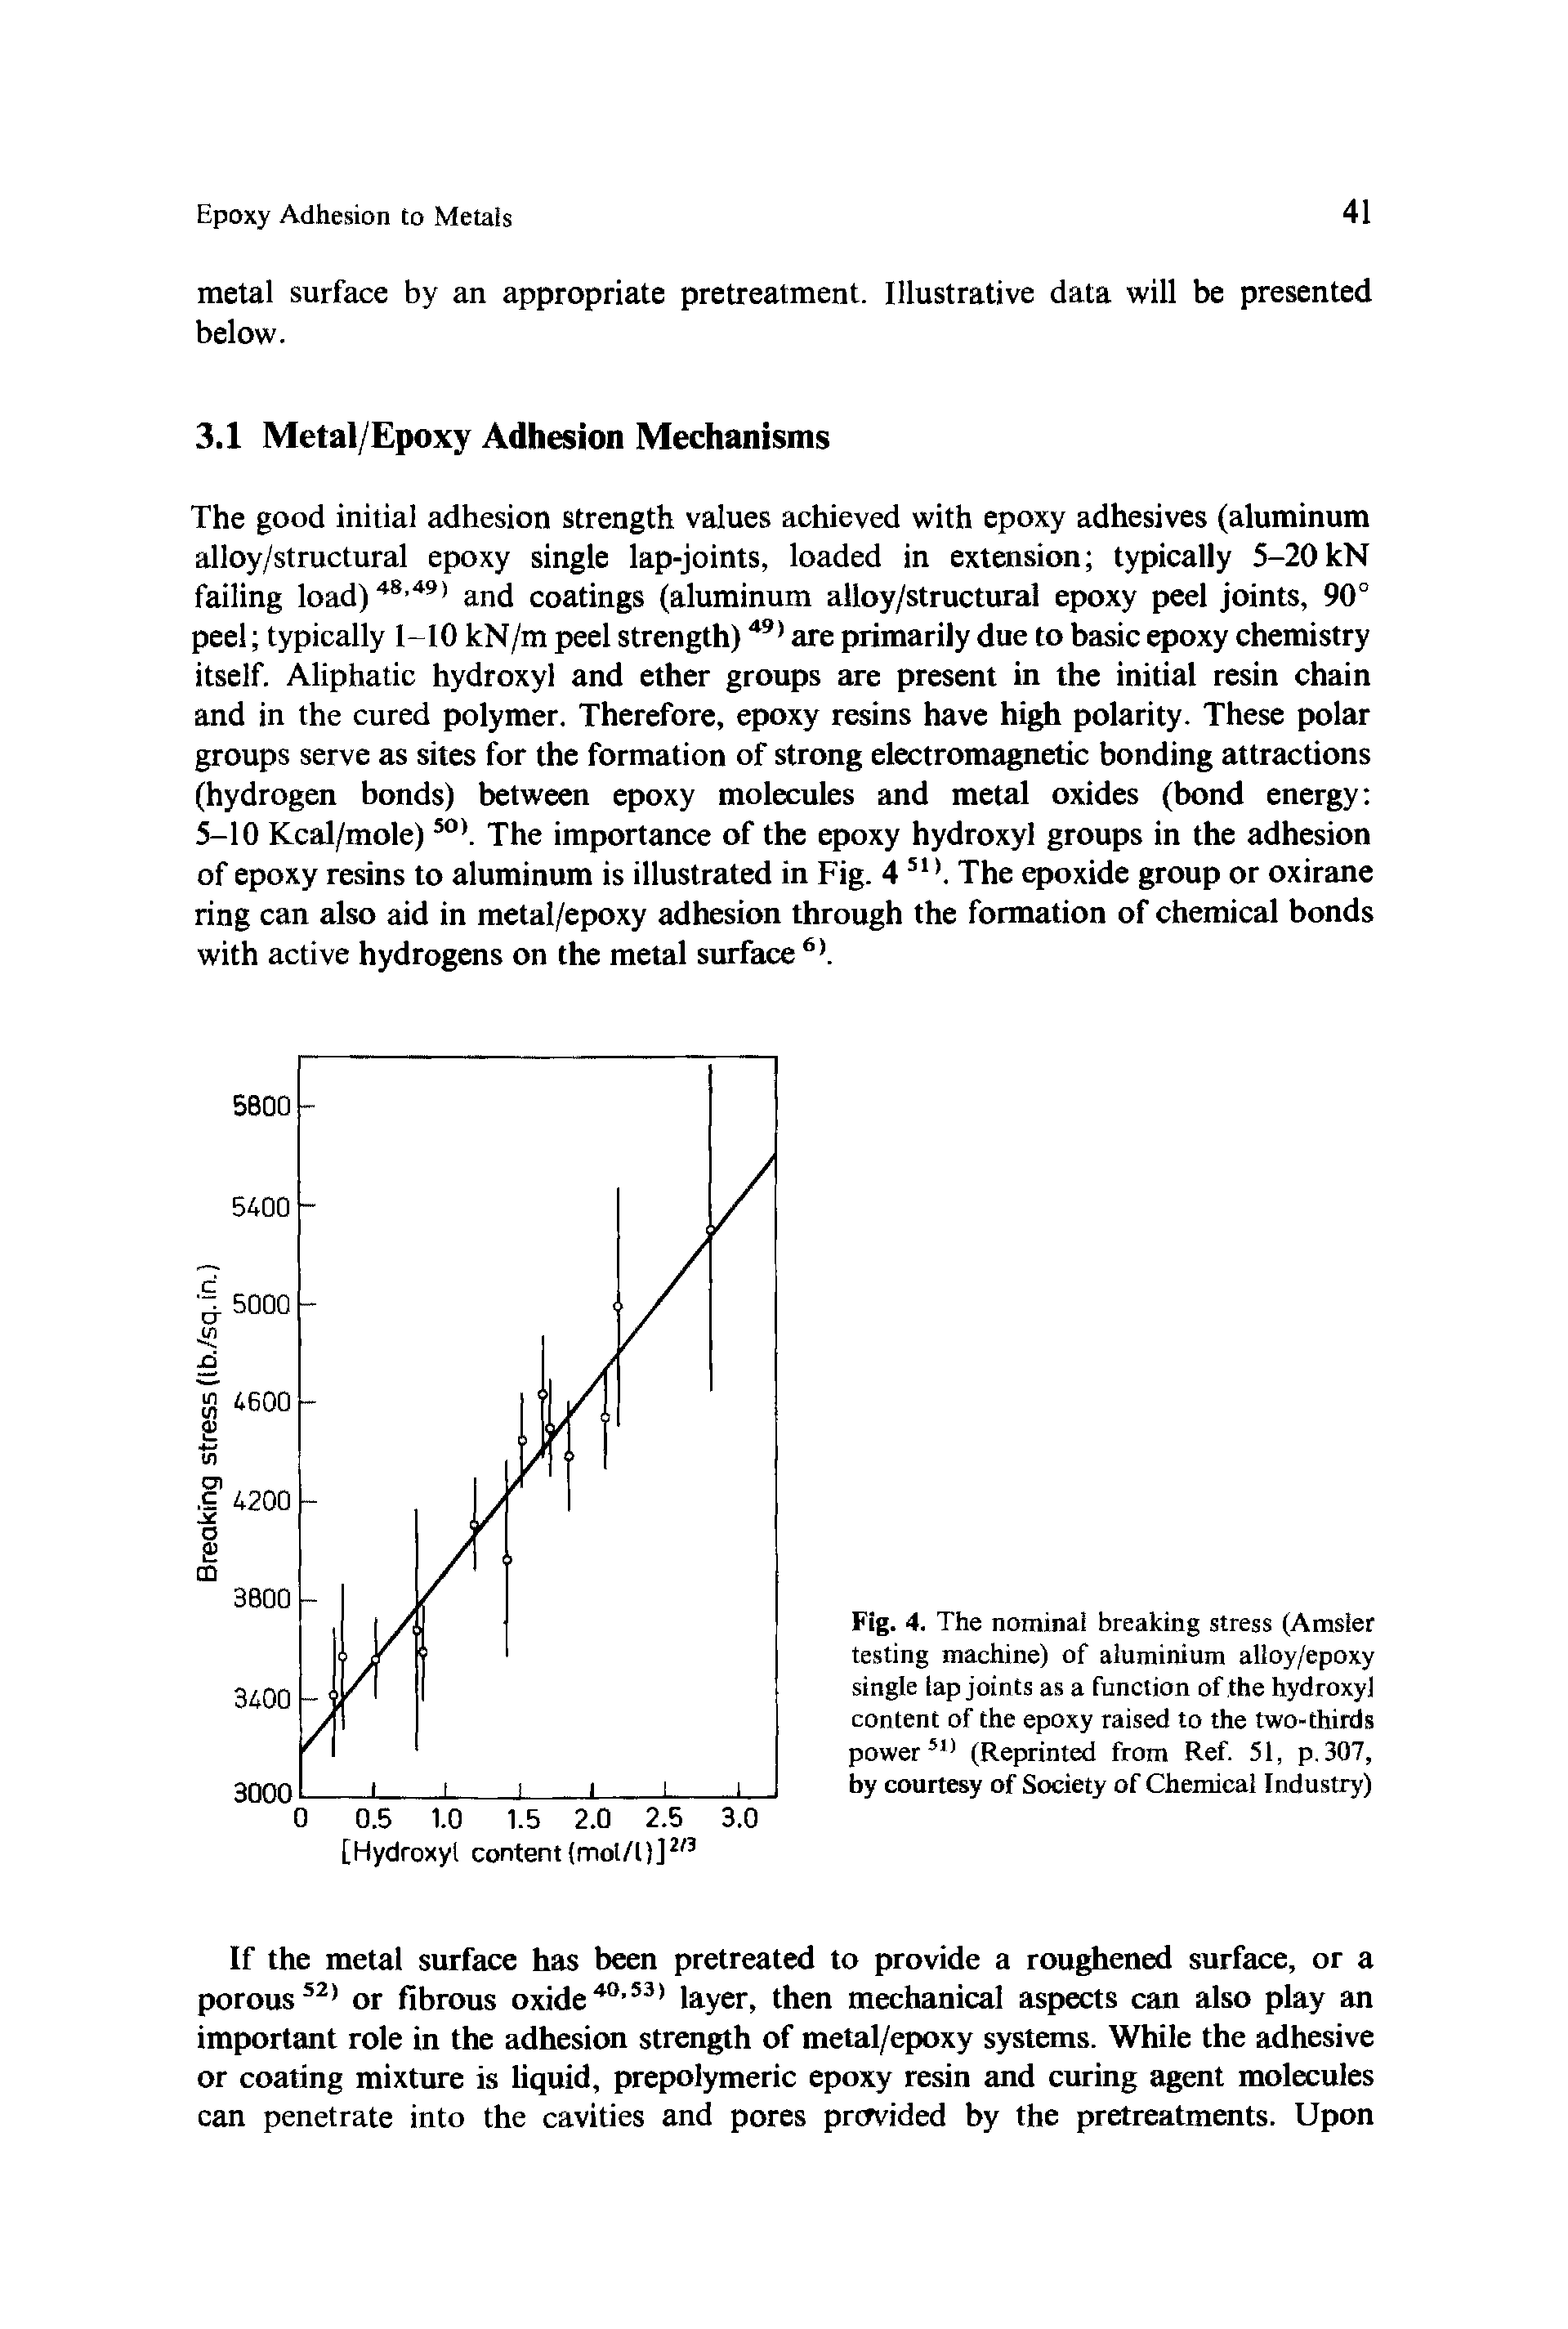 Fig. 4. The nominal breaking stress (Amsier testing machine) of aluminium alloy/epoxy single lap joints as a function of the hydroxyl content of the epoxy raised to the two-thirds power51 (Reprinted from Ref. 51, p.307, by courtesy of Society of Chemical Industry)...